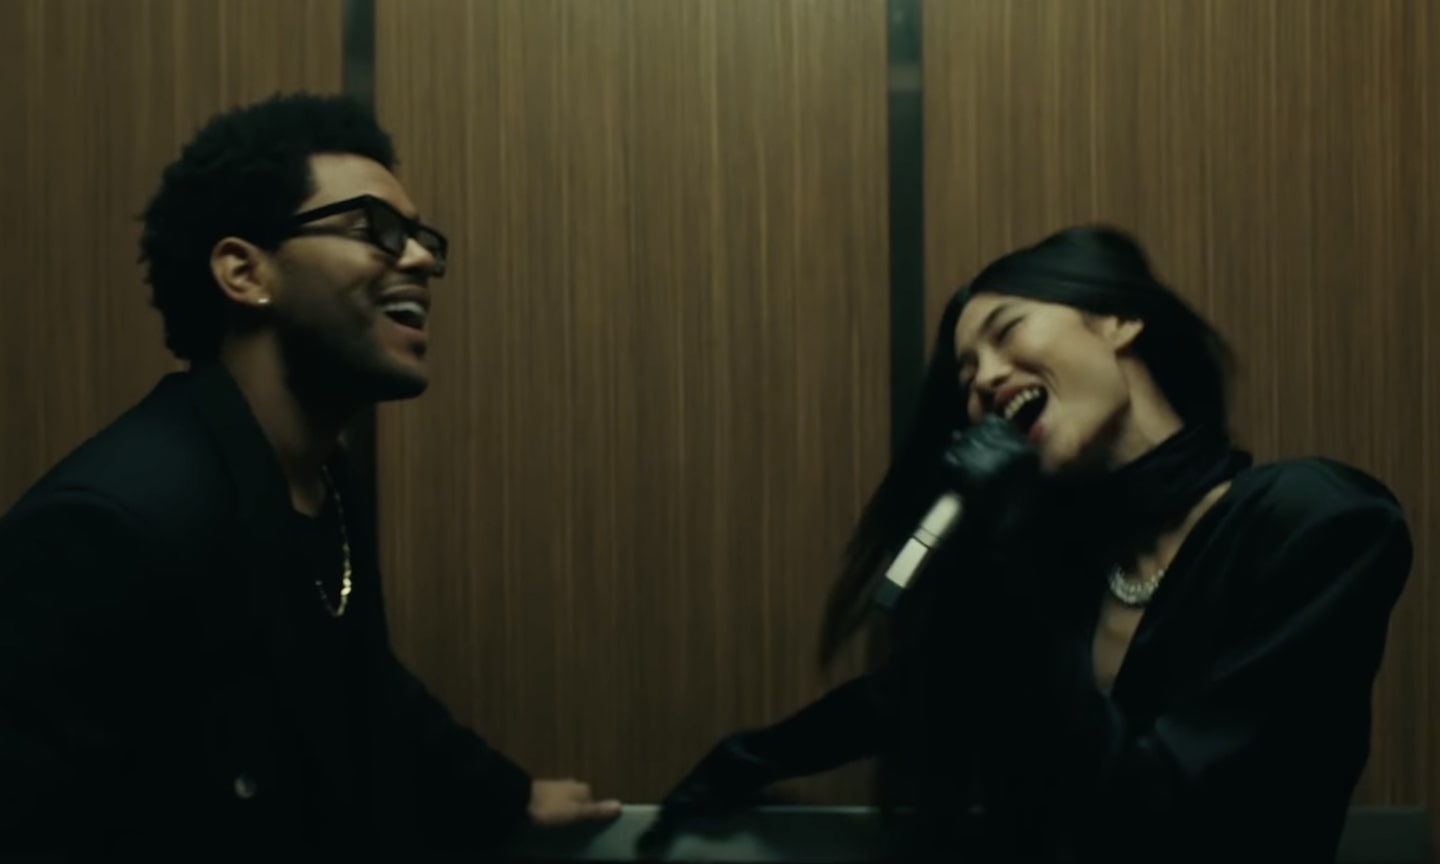 The Weeknd shares 'Out Of Time' video with 'Squid Game' star